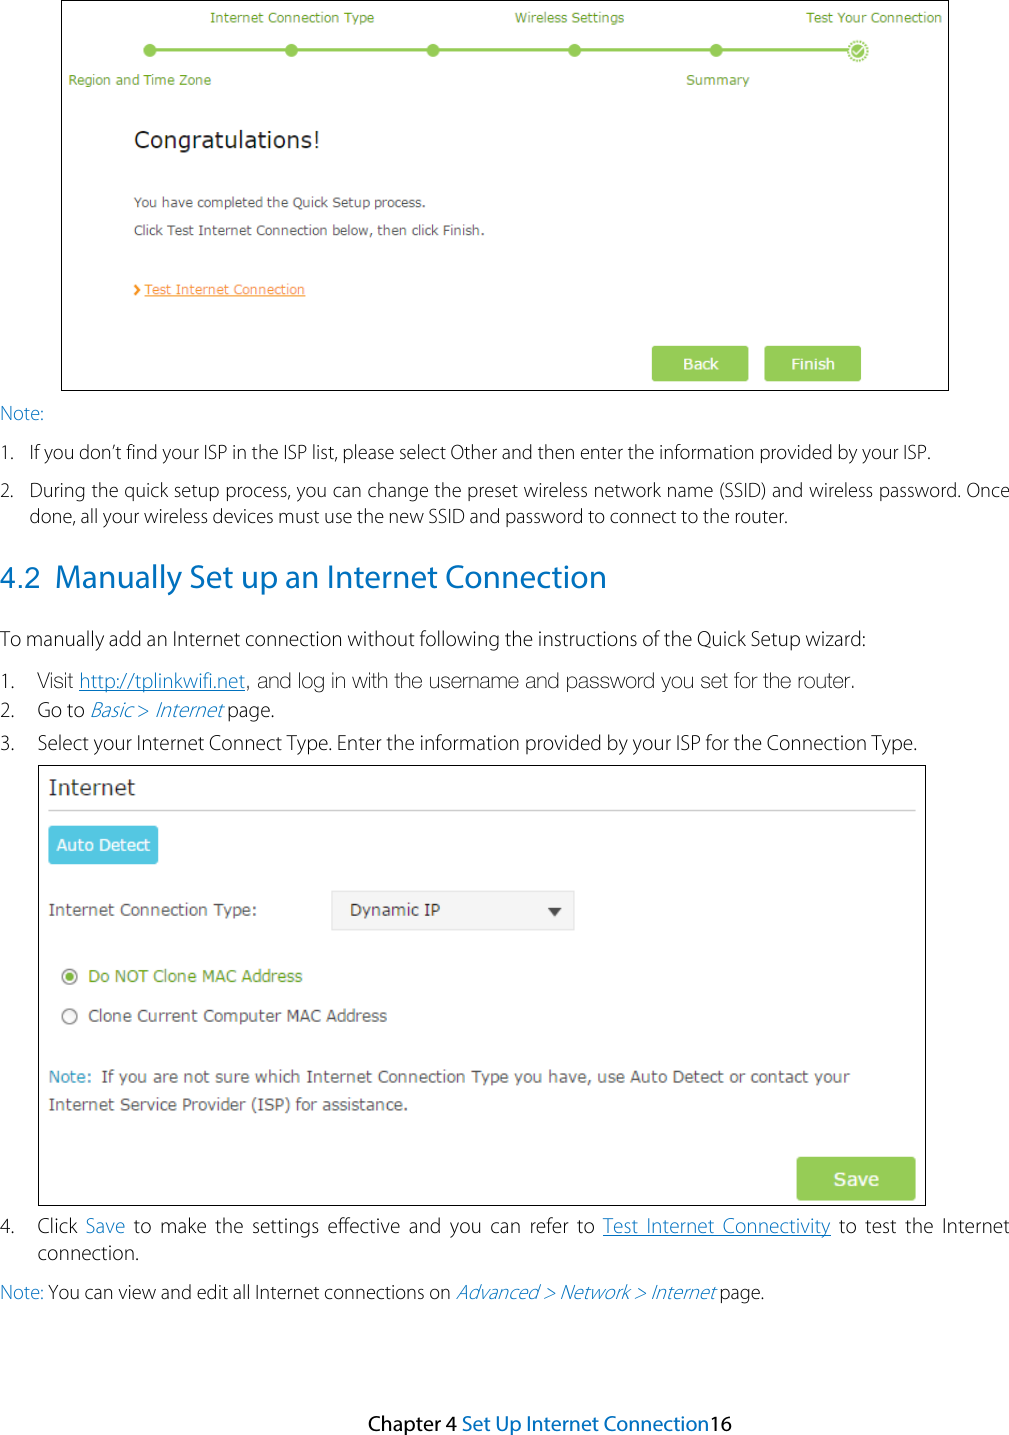 Note: 1. If you don’t find your ISP in the ISP list, please select Other and then enter the information provided by your ISP.2. During the quick setup process, you can change the preset wireless network name (SSID) and wireless password. Oncedone, all your wireless devices must use the new SSID and password to connect to the router.4.2 Manually Set up an Internet Connection To manually add an Internet connection without following the instructions of the Quick Setup wizard: 1. Visit http://tplinkwifi.net, and log in with the username and password you set for the router.2. Go to Basic &gt; Internet page.3. Select your Internet Connect Type. Enter the information provided by your ISP for the Connection Type.4. Click Save to make the settings effective and you can refer to Test Internet Connectivity to test the Internetconnection.Note: You can view and edit all Internet connections on Advanced &gt; Network &gt; Internet page. Chapter 4 Set Up Internet Connection16 